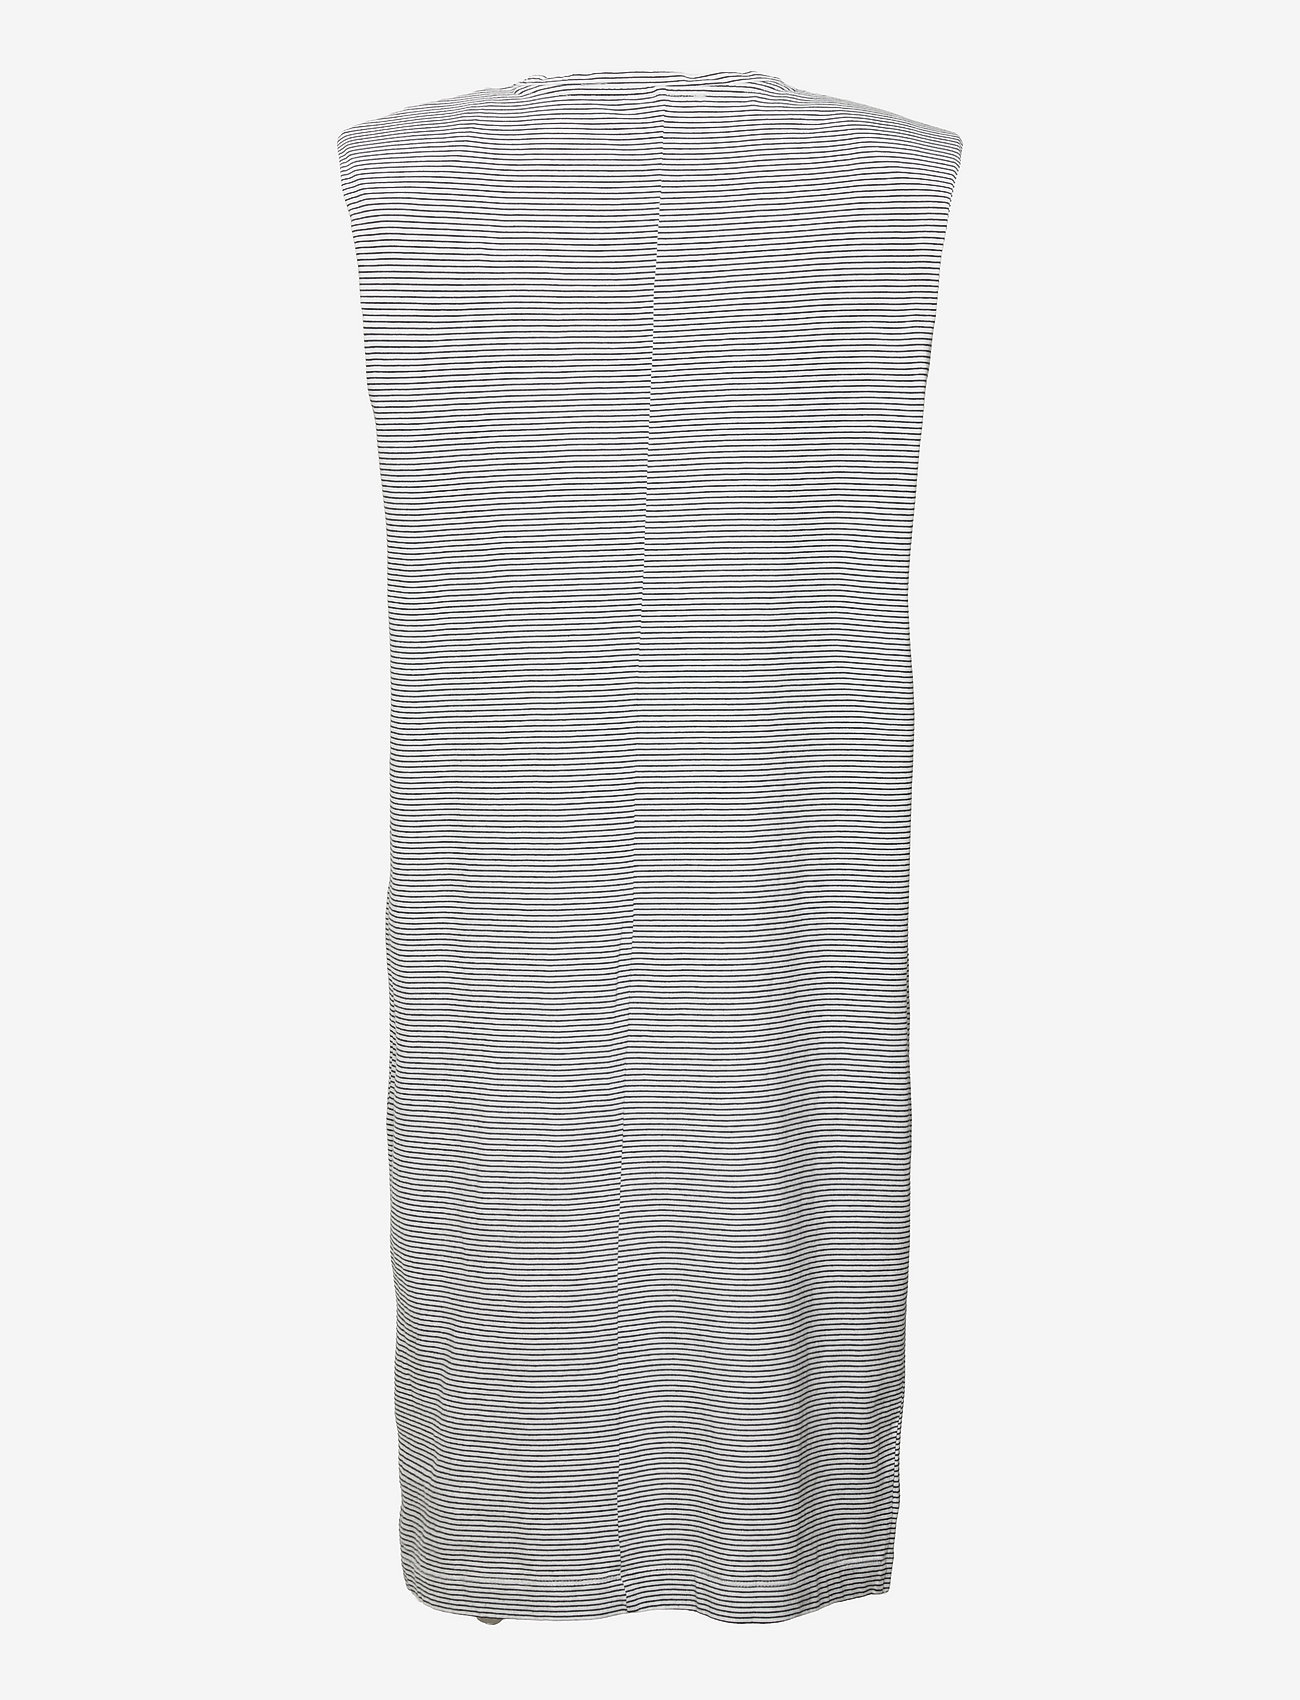 Esprit Collection - Jersey dress with shoulder pads - t-shirt dresses - off white - 1